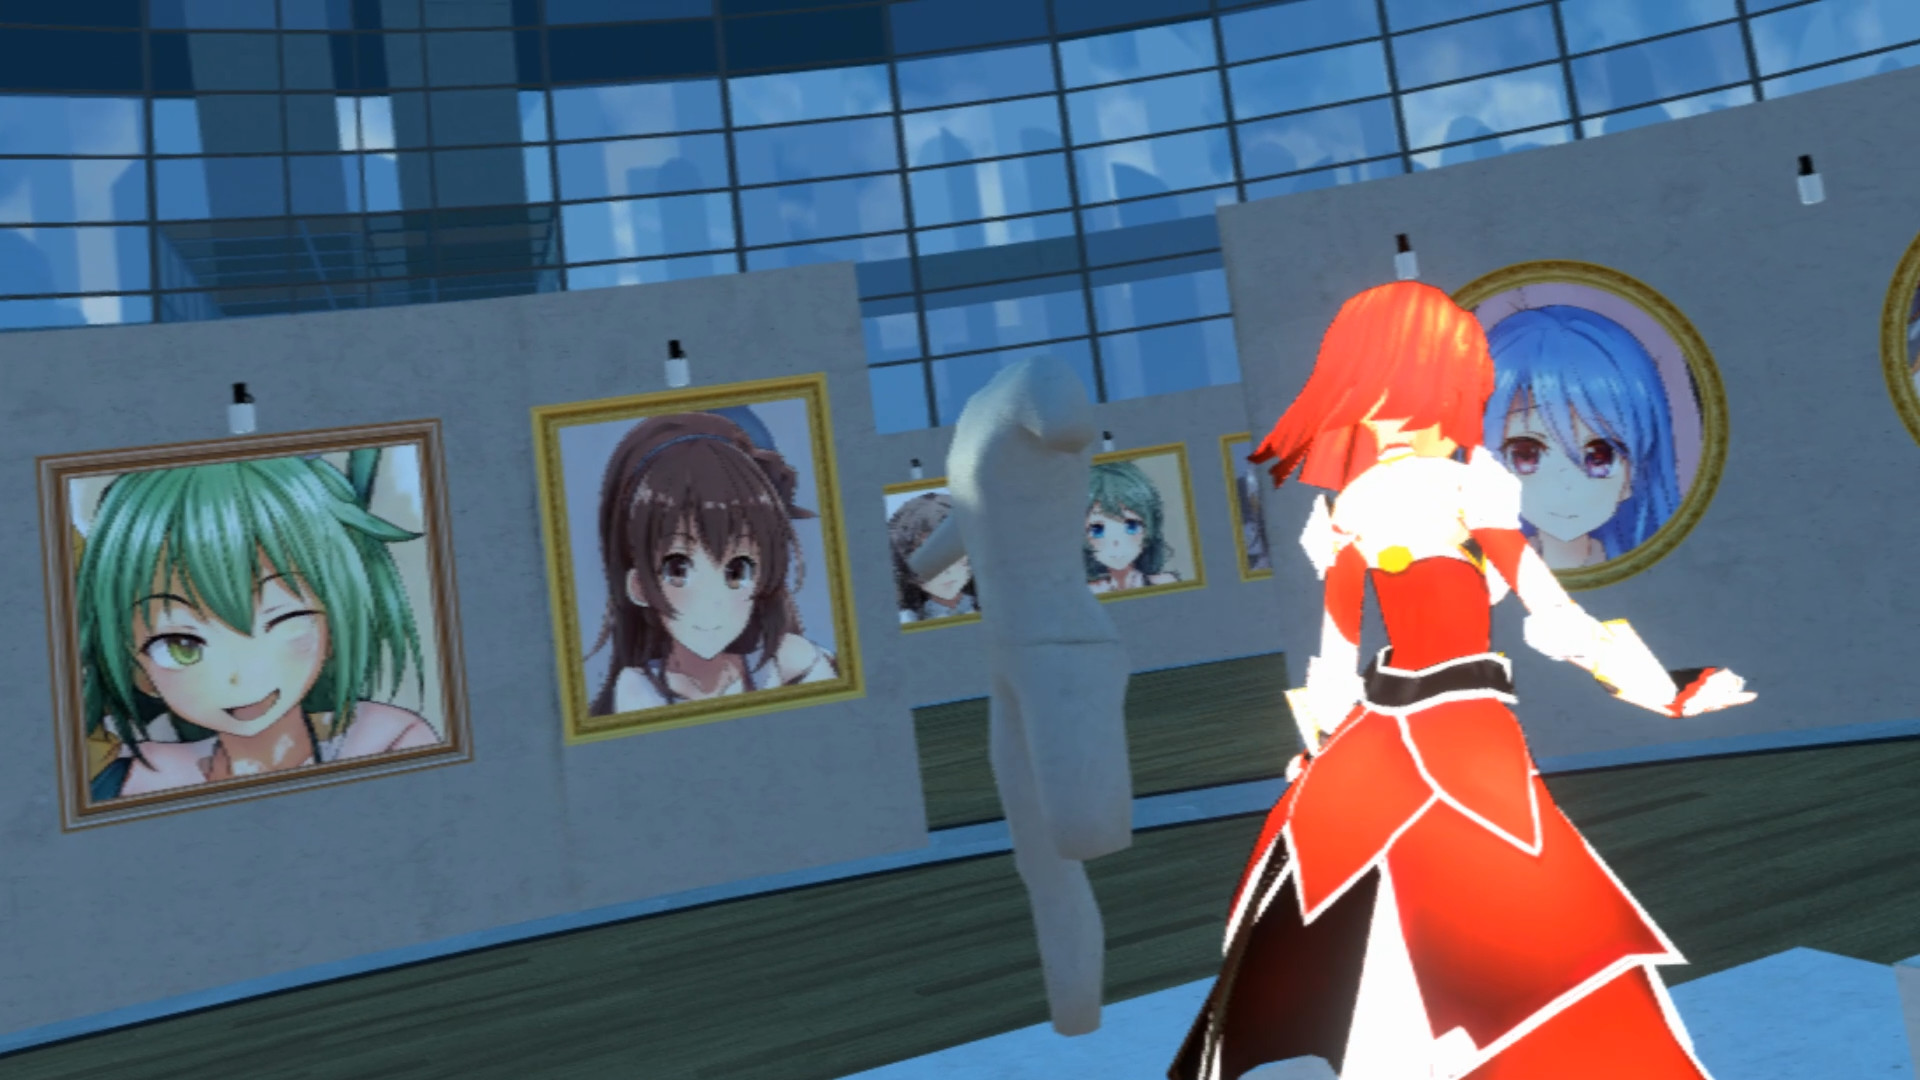 VR GALLERY Cute Anime Girl Exhibition free game